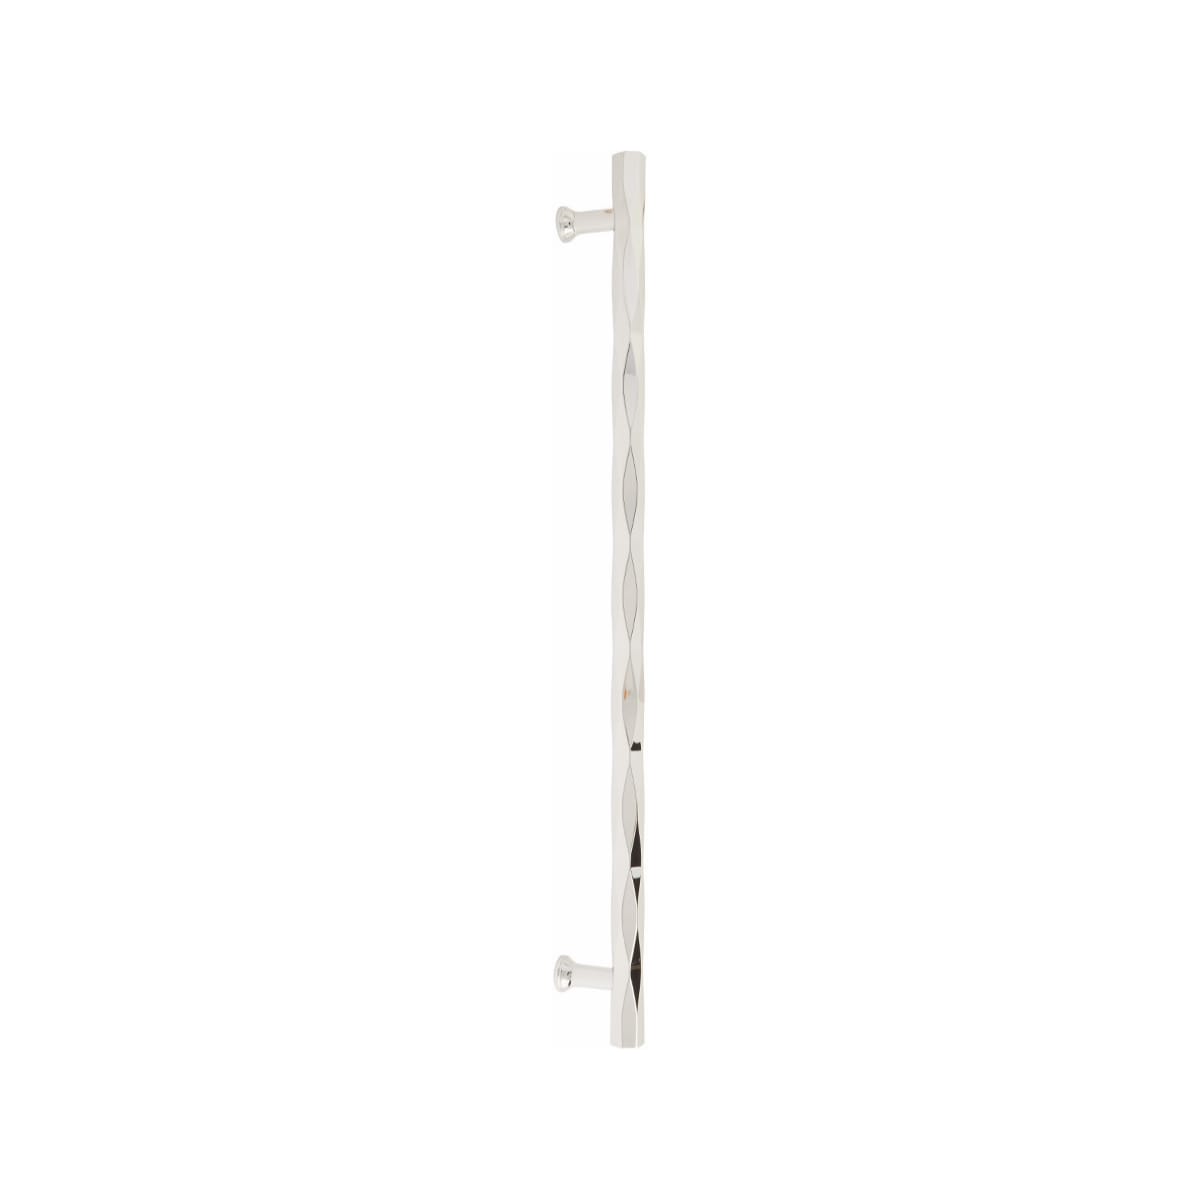 CS87006US14 - Concealed Surface Mount - Tribeca Appliance Pull - 18" - Polished Nickel